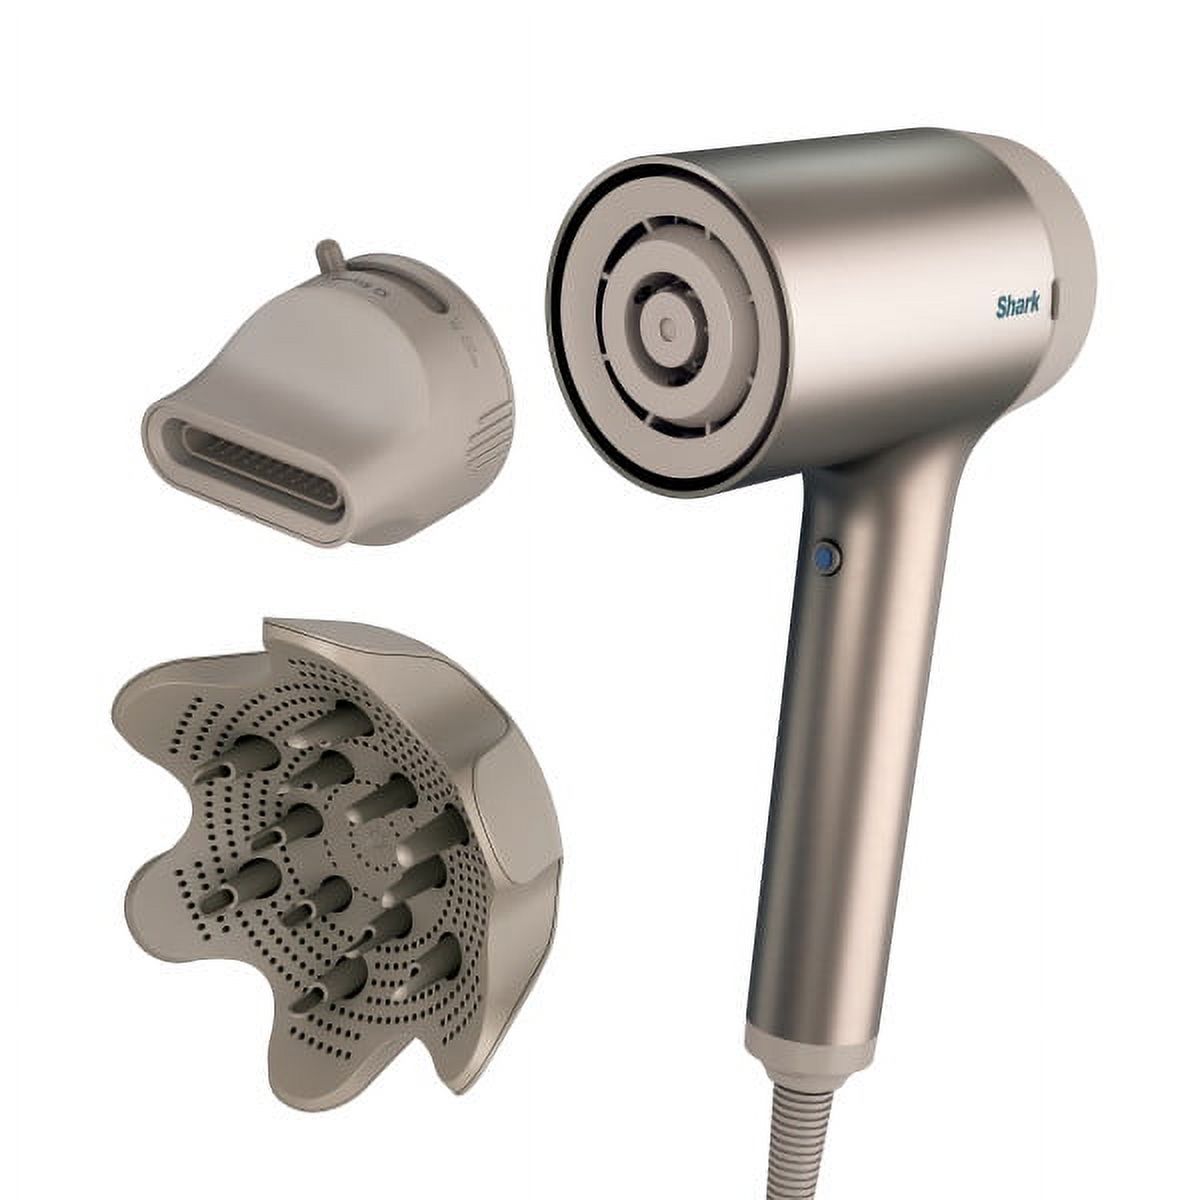 Shark™ HyperAIR Fast-Drying Hair Dryer with IQ 2-in-1 Concentrator and Curl-Defining Diffuser Attachments (HD113BRN) - image 1 of 9